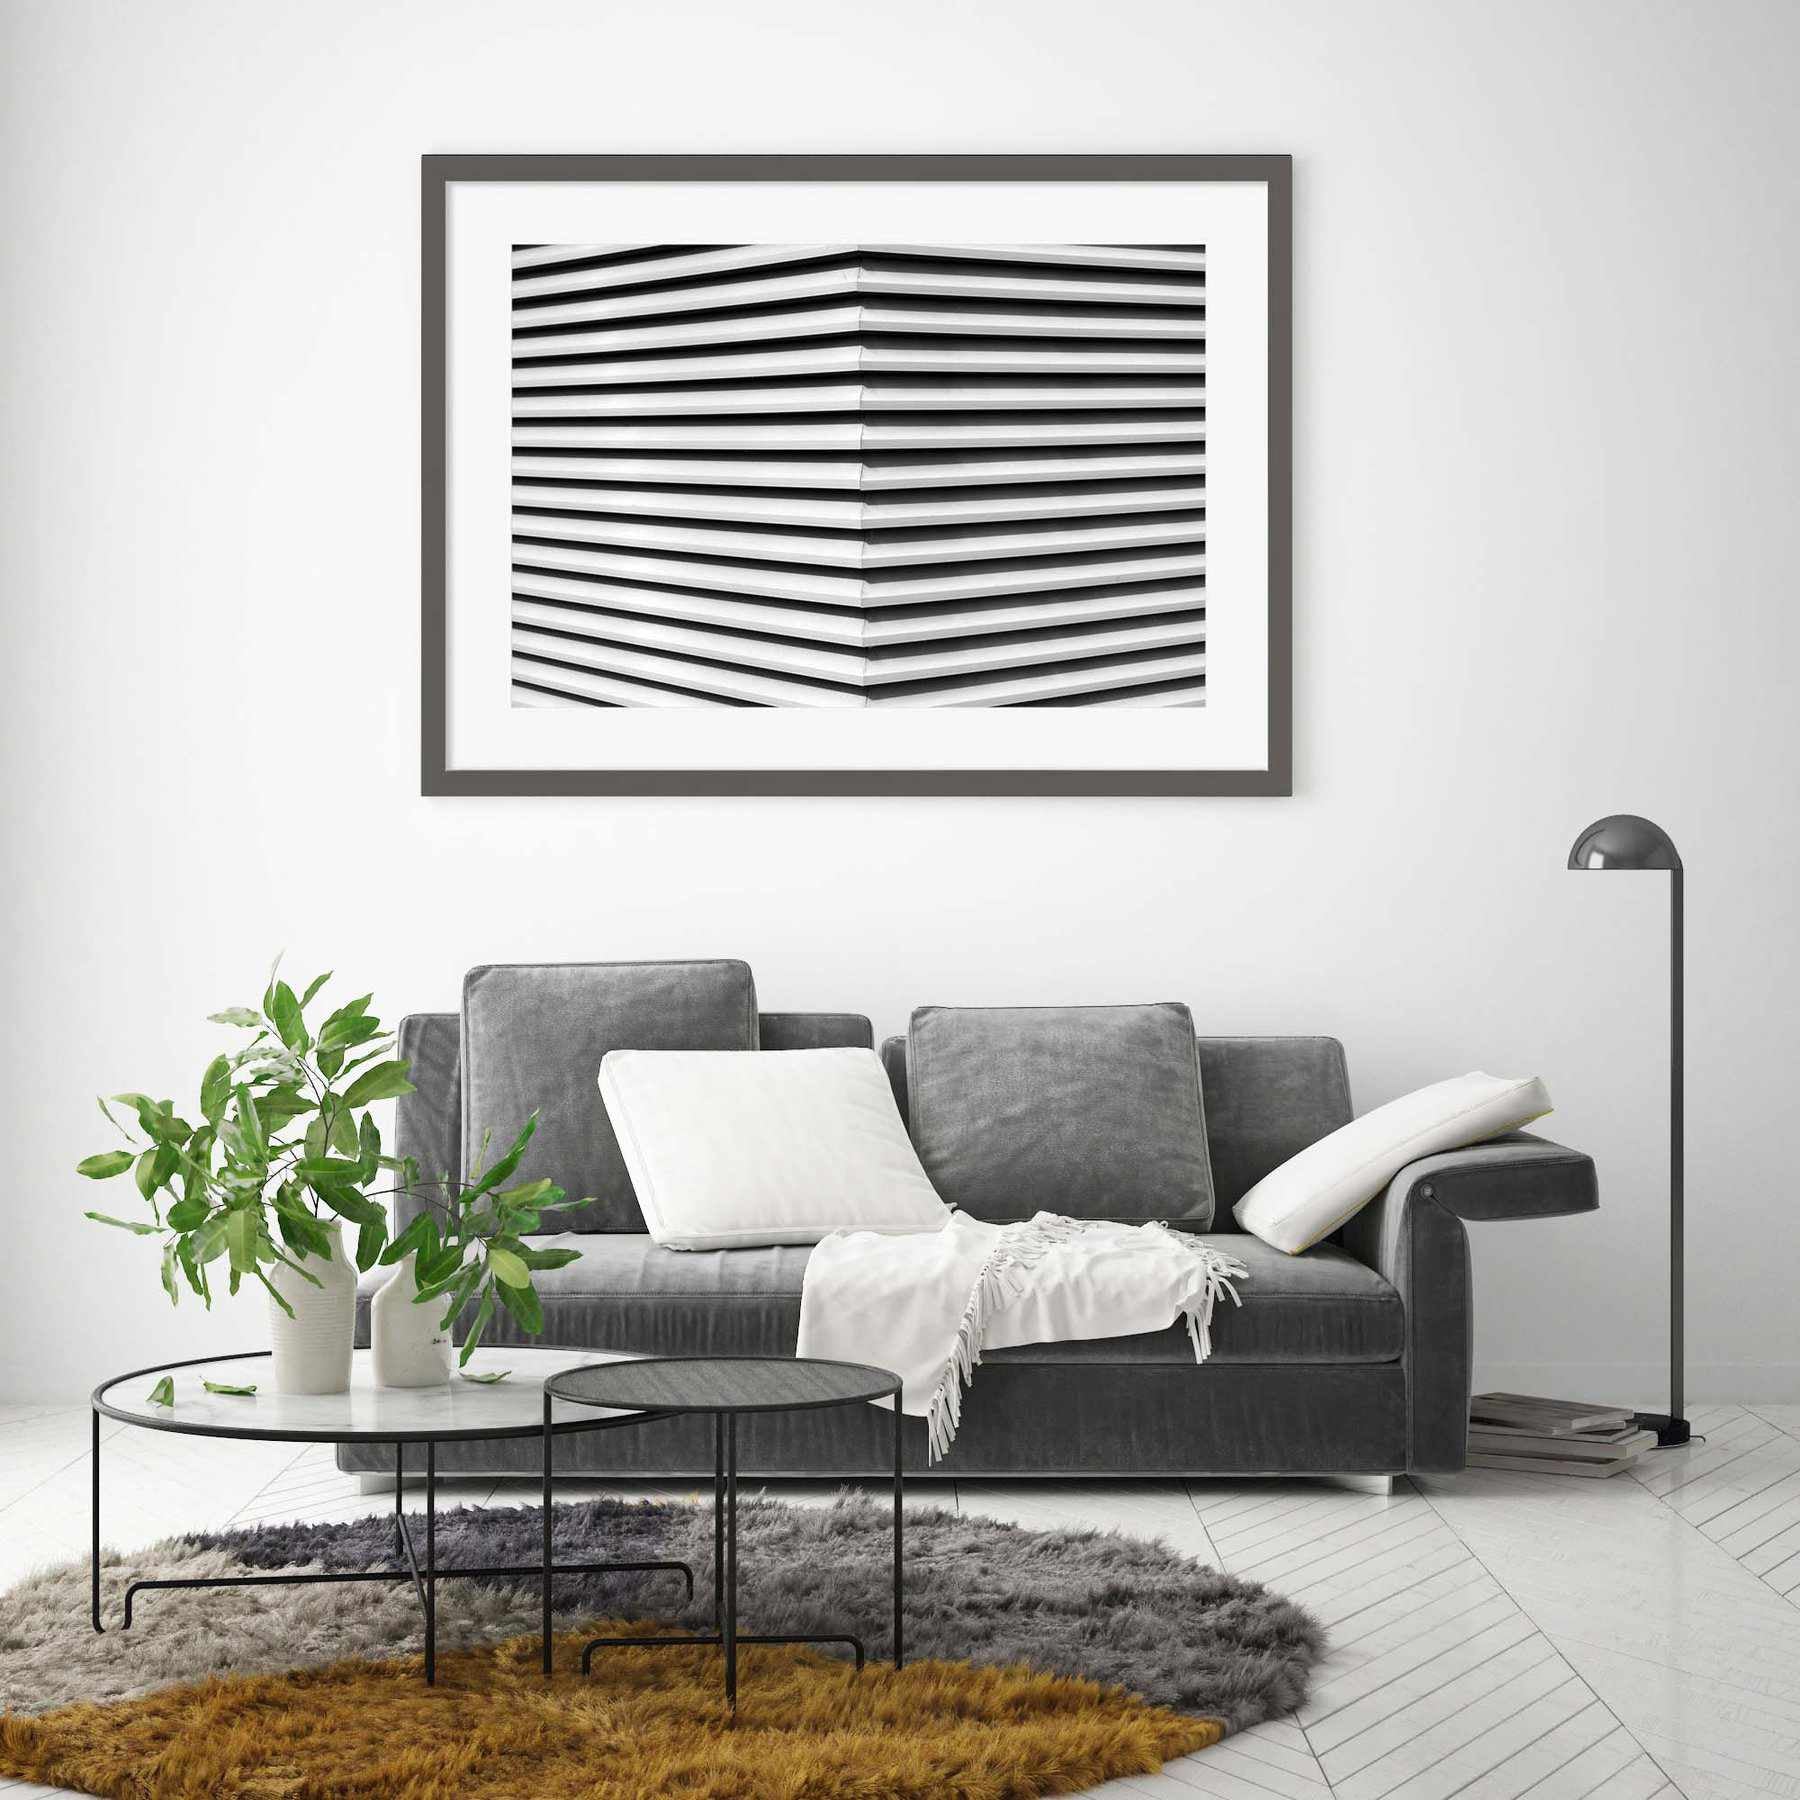 10 Must-Have Black and White Photography Prints - Abstract House